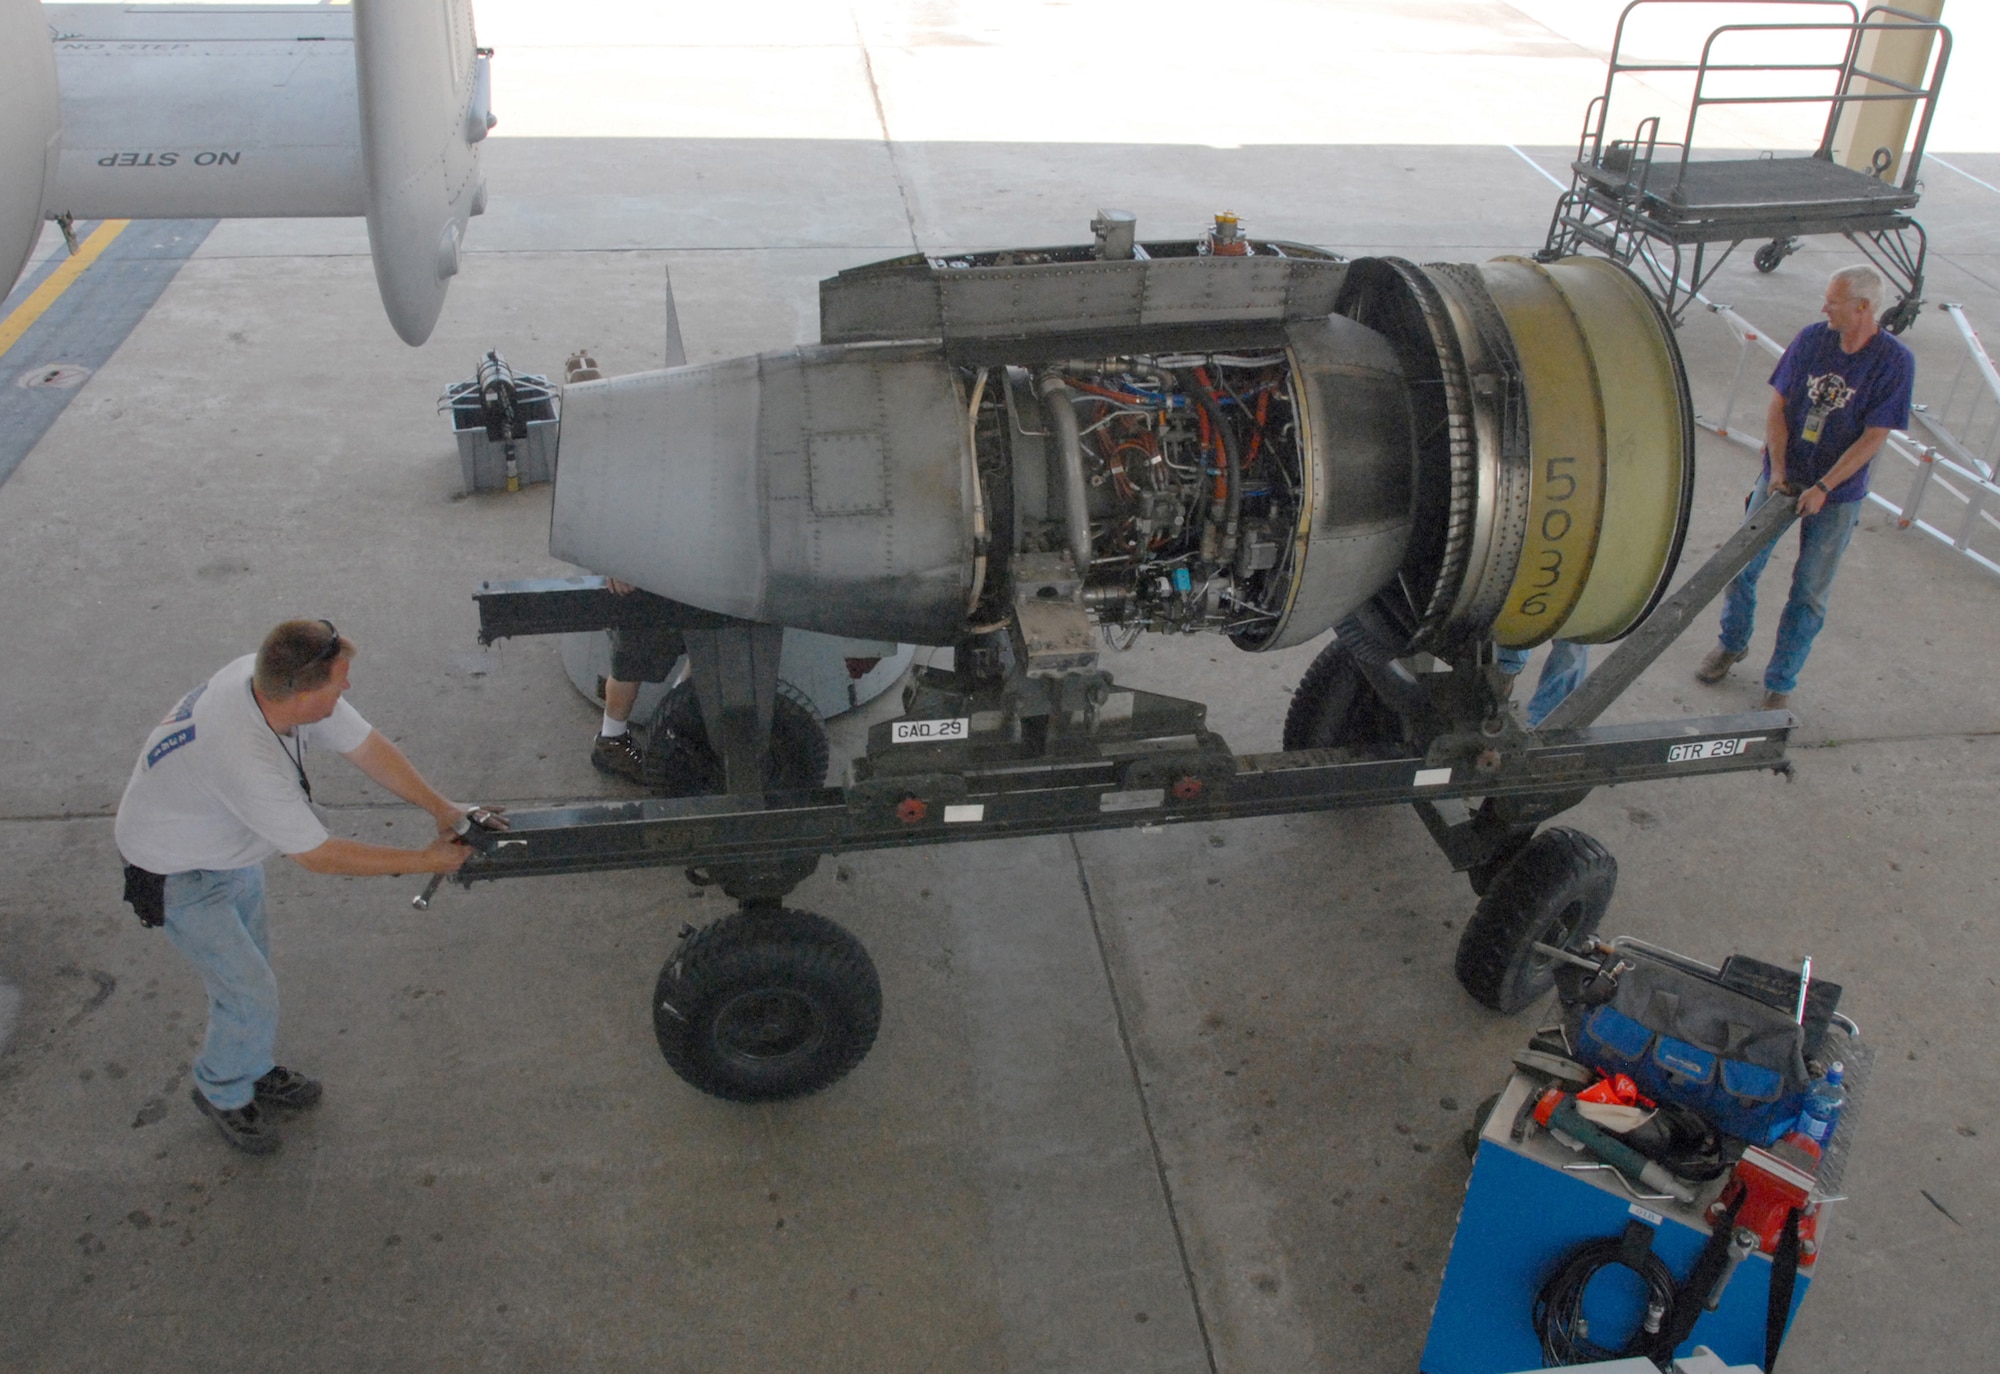 Bob Boye, left, and John Ezell move an engine trailer after removing a TF-34-100A turbo-fan engine from an A-10 Thunderbolt II at Whiteman Air Force Base, Mo., June 2, 2009.  This engine set a longevity record in the 442nd Fighter Wing for being on the same airplane for 10 years and lasted through 3,464.4 hours of operating time.  The engine is a TF-34-100A engine manufactured by General Electric.  Both men are crew chiefs with the 442nd Aircraft Maintenance Squadron, part of the 442nd Fighter Wing, an Air Force Reserve A-10 unit based at Whiteman.  (U.S. Air Force photo/Master Sgt. Bill Huntington) 